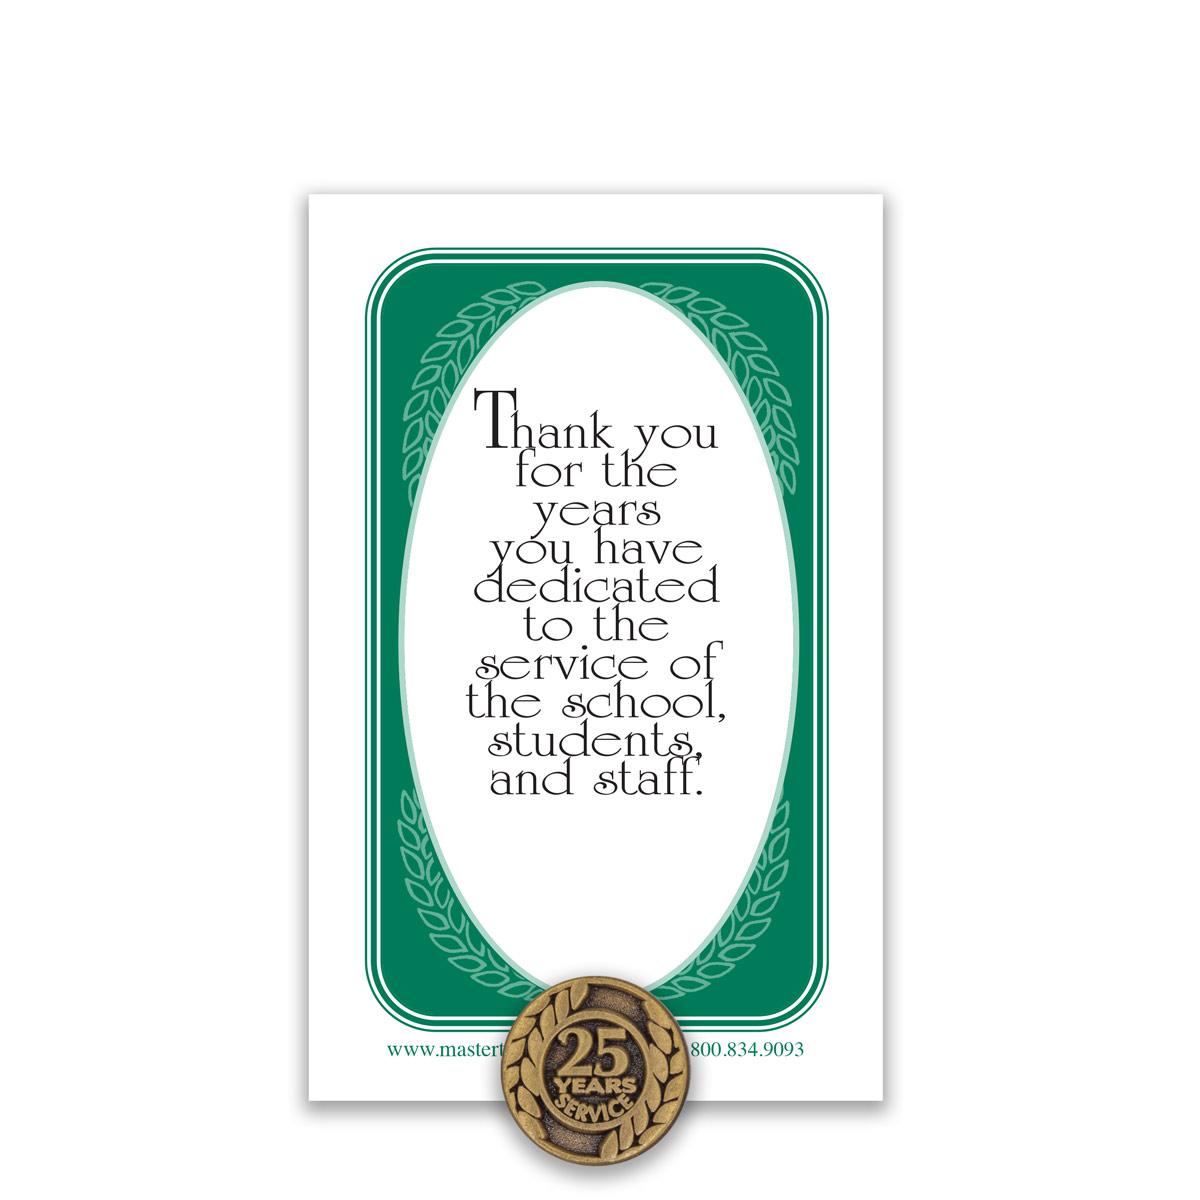 25 Year of Service Antique Gold Tone Lapel Pin with Thank You Message